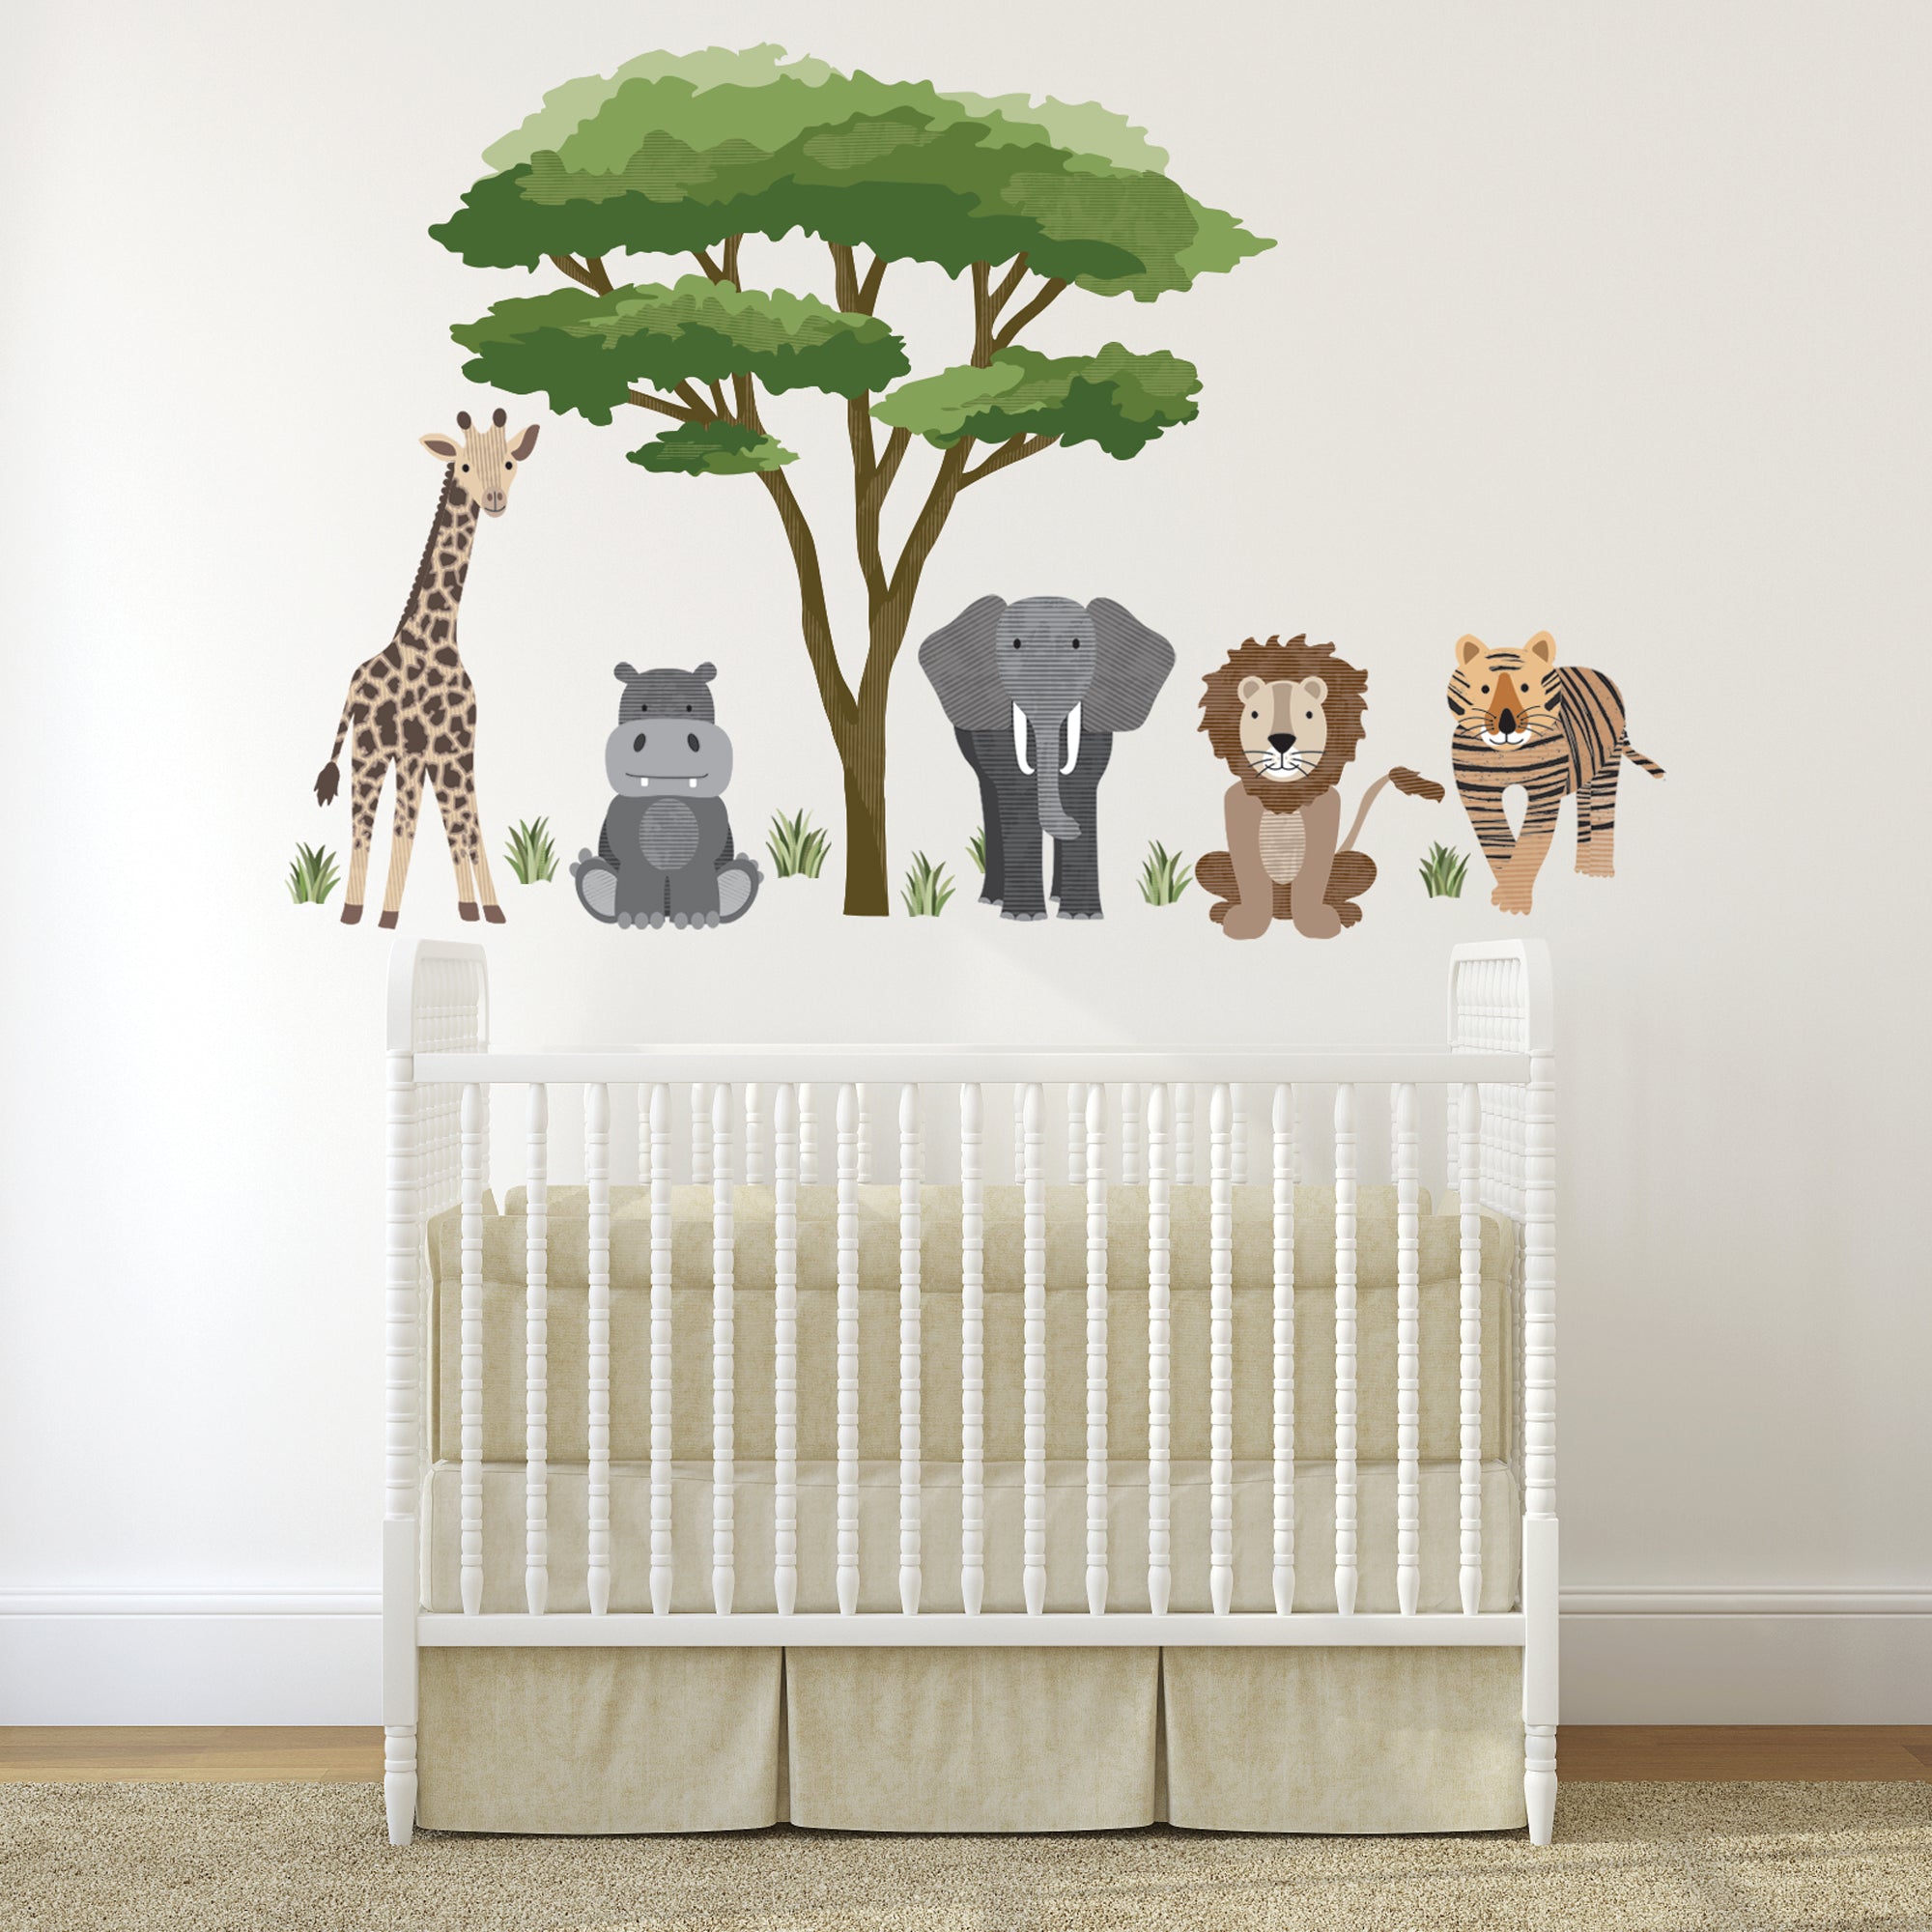 Large Safari Animal Wall Decals with Acacia Tree, Nursery Wall Decals,  Jungle Wall Stickers, African Animal Wall Decals